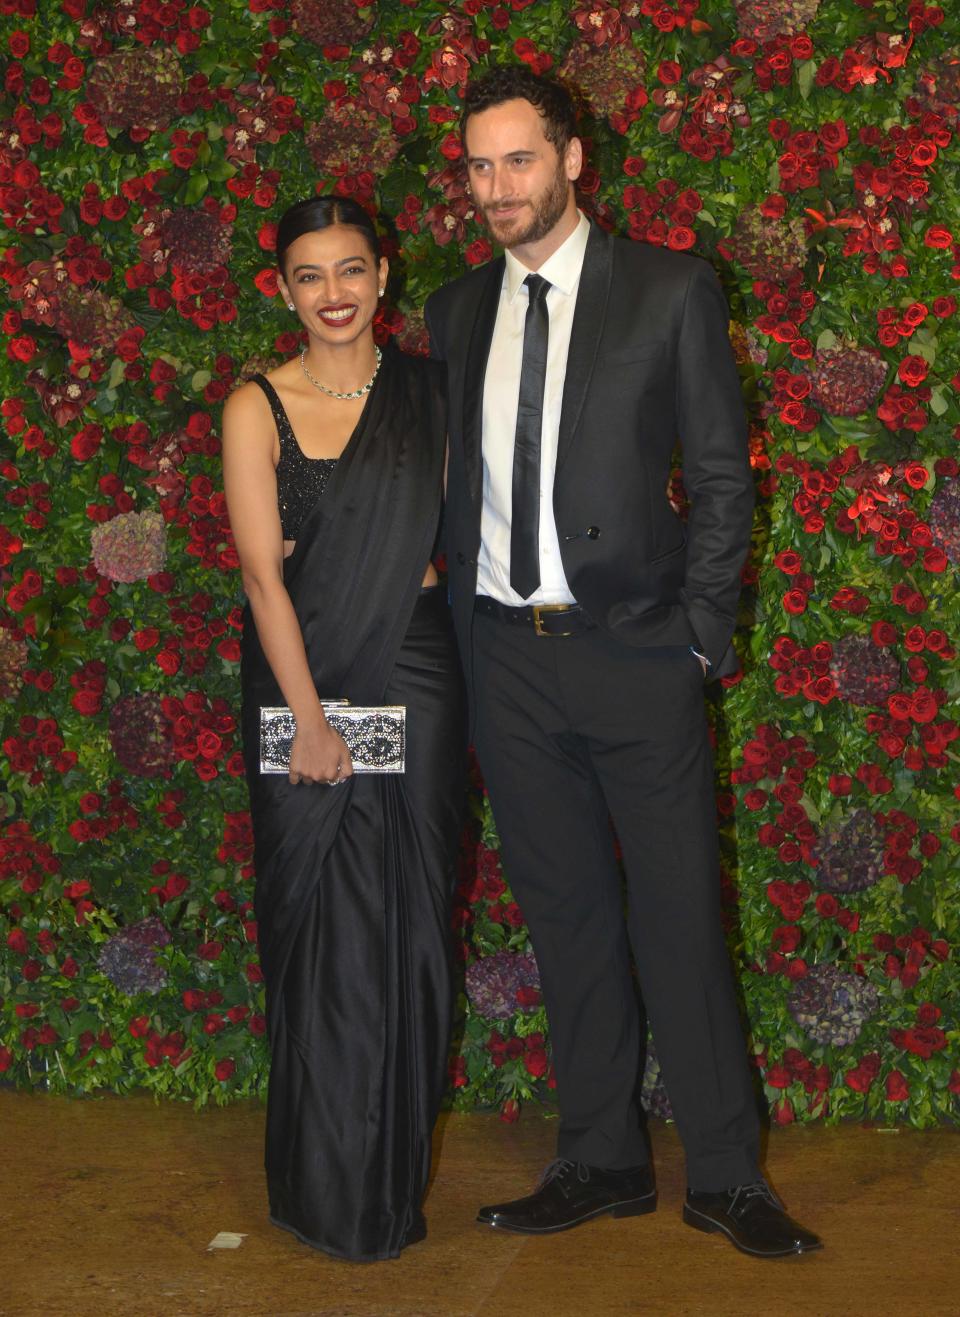 MUMBAI, MAHARASHTRA-DECEMBER 01: Radhika Apte and Benedict Taylor at Ranveer Singh and Deepika Padukones reception in Mumbai. (Photo by Milind Shelte/The India Today Group via Getty Images)